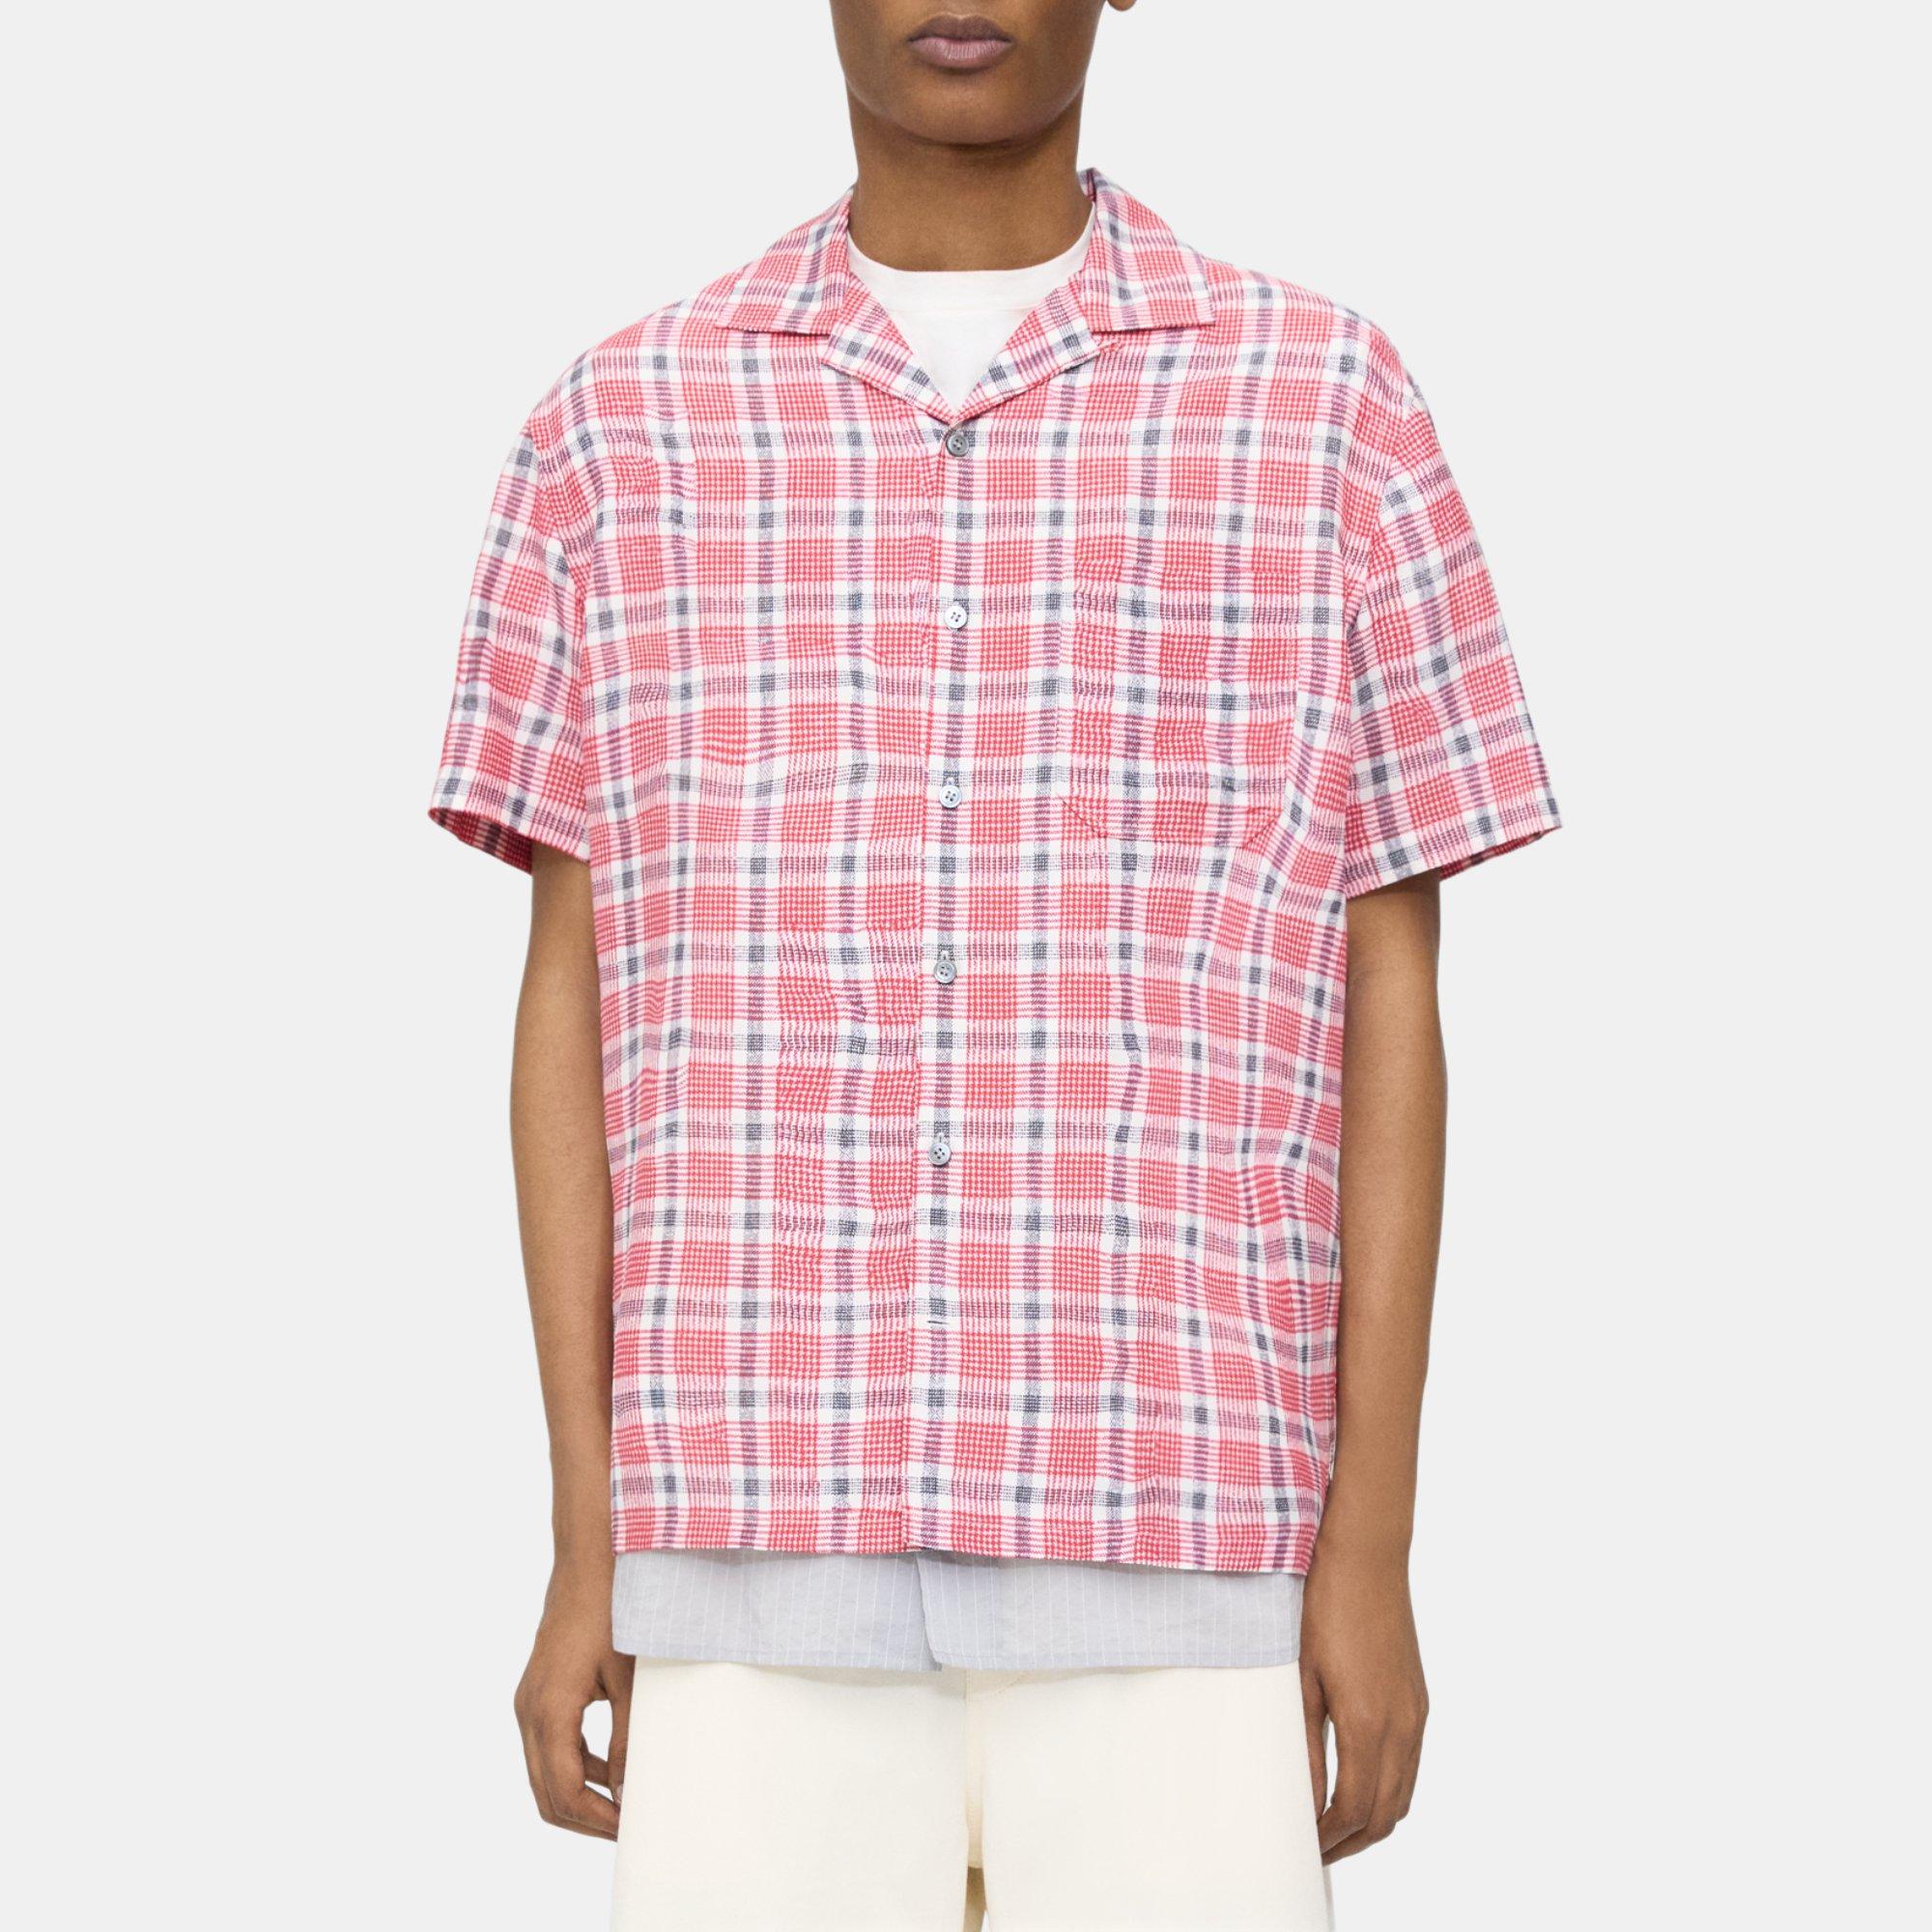 Theory Camp Shirt in Wrinkle Check